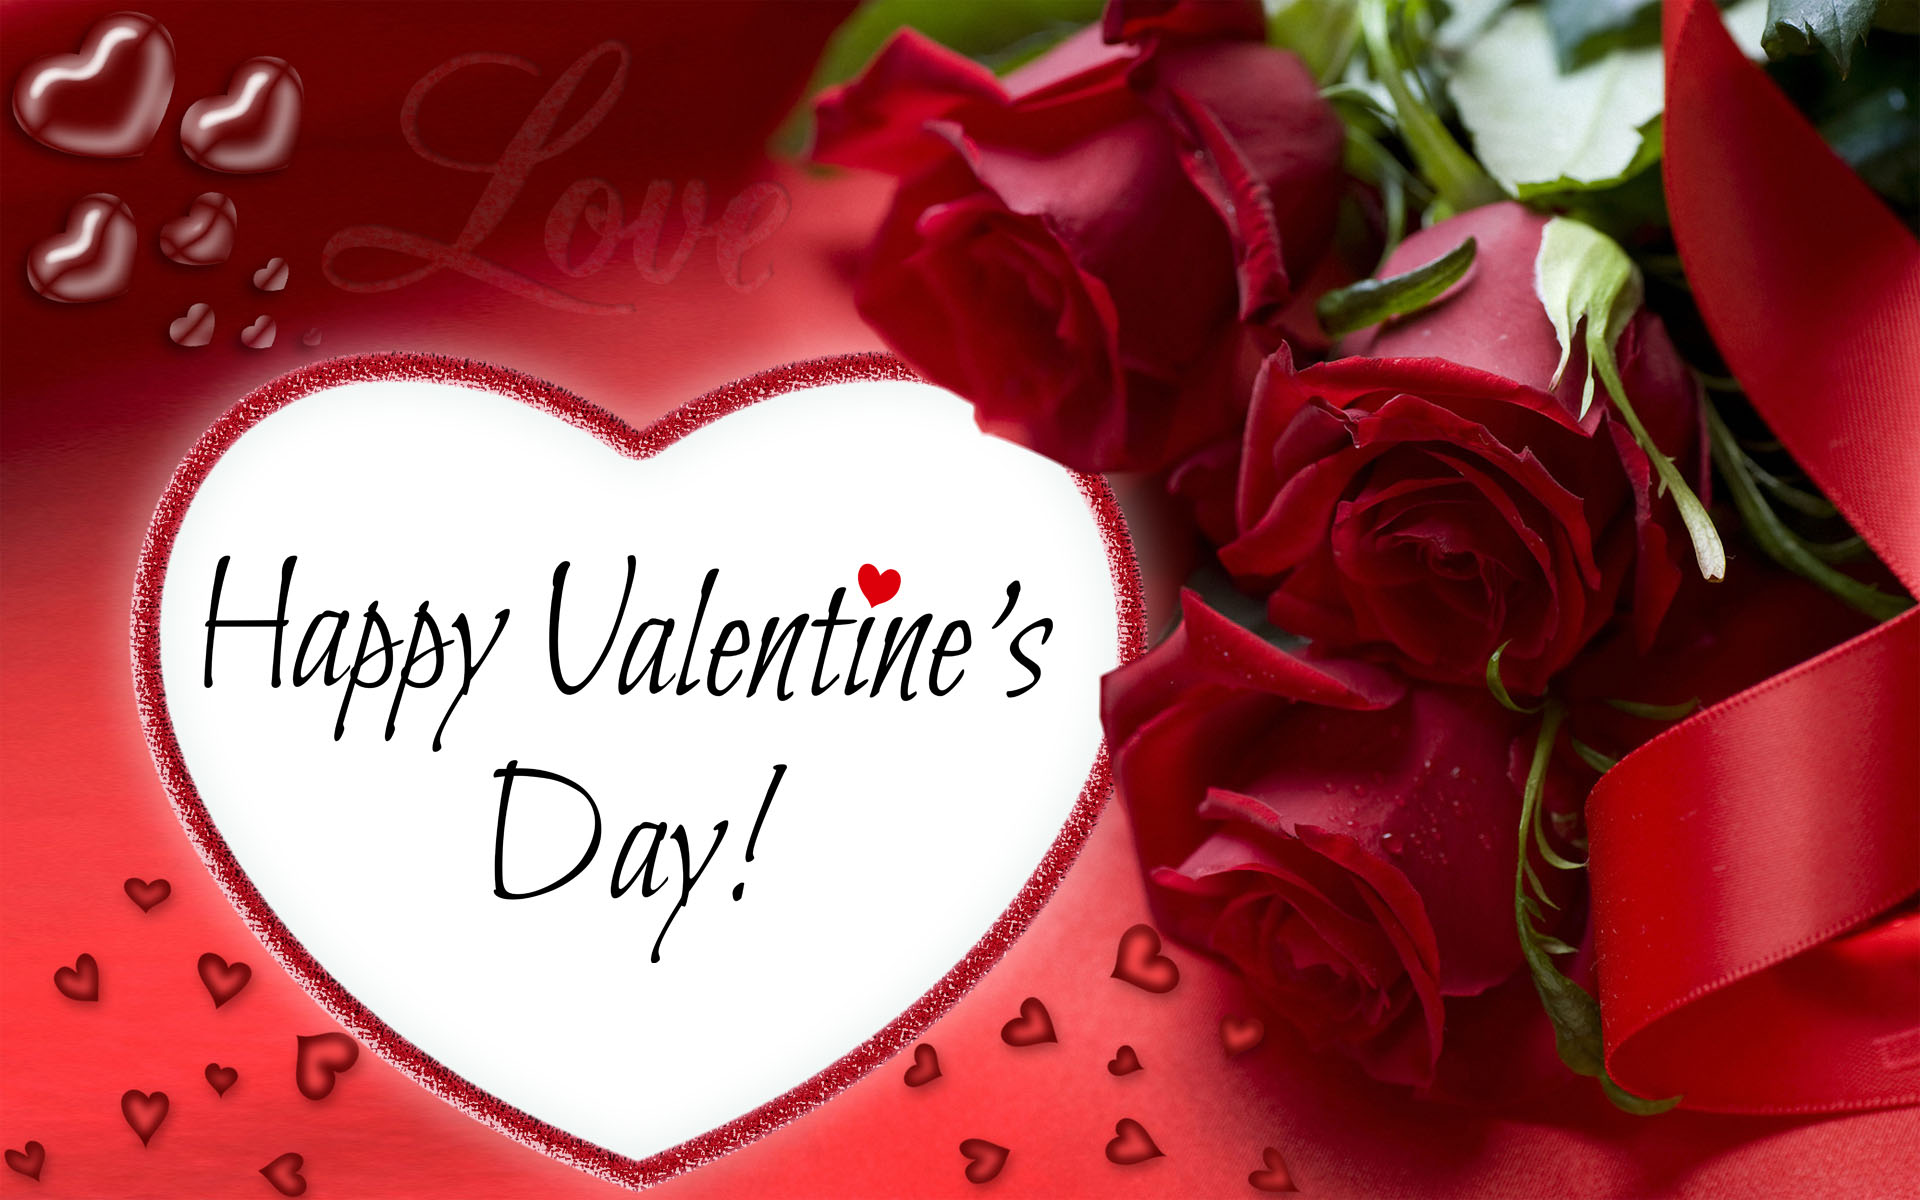 Happy Valentines Day Love Card Red Roses and Heart Wallpapers Hd ...